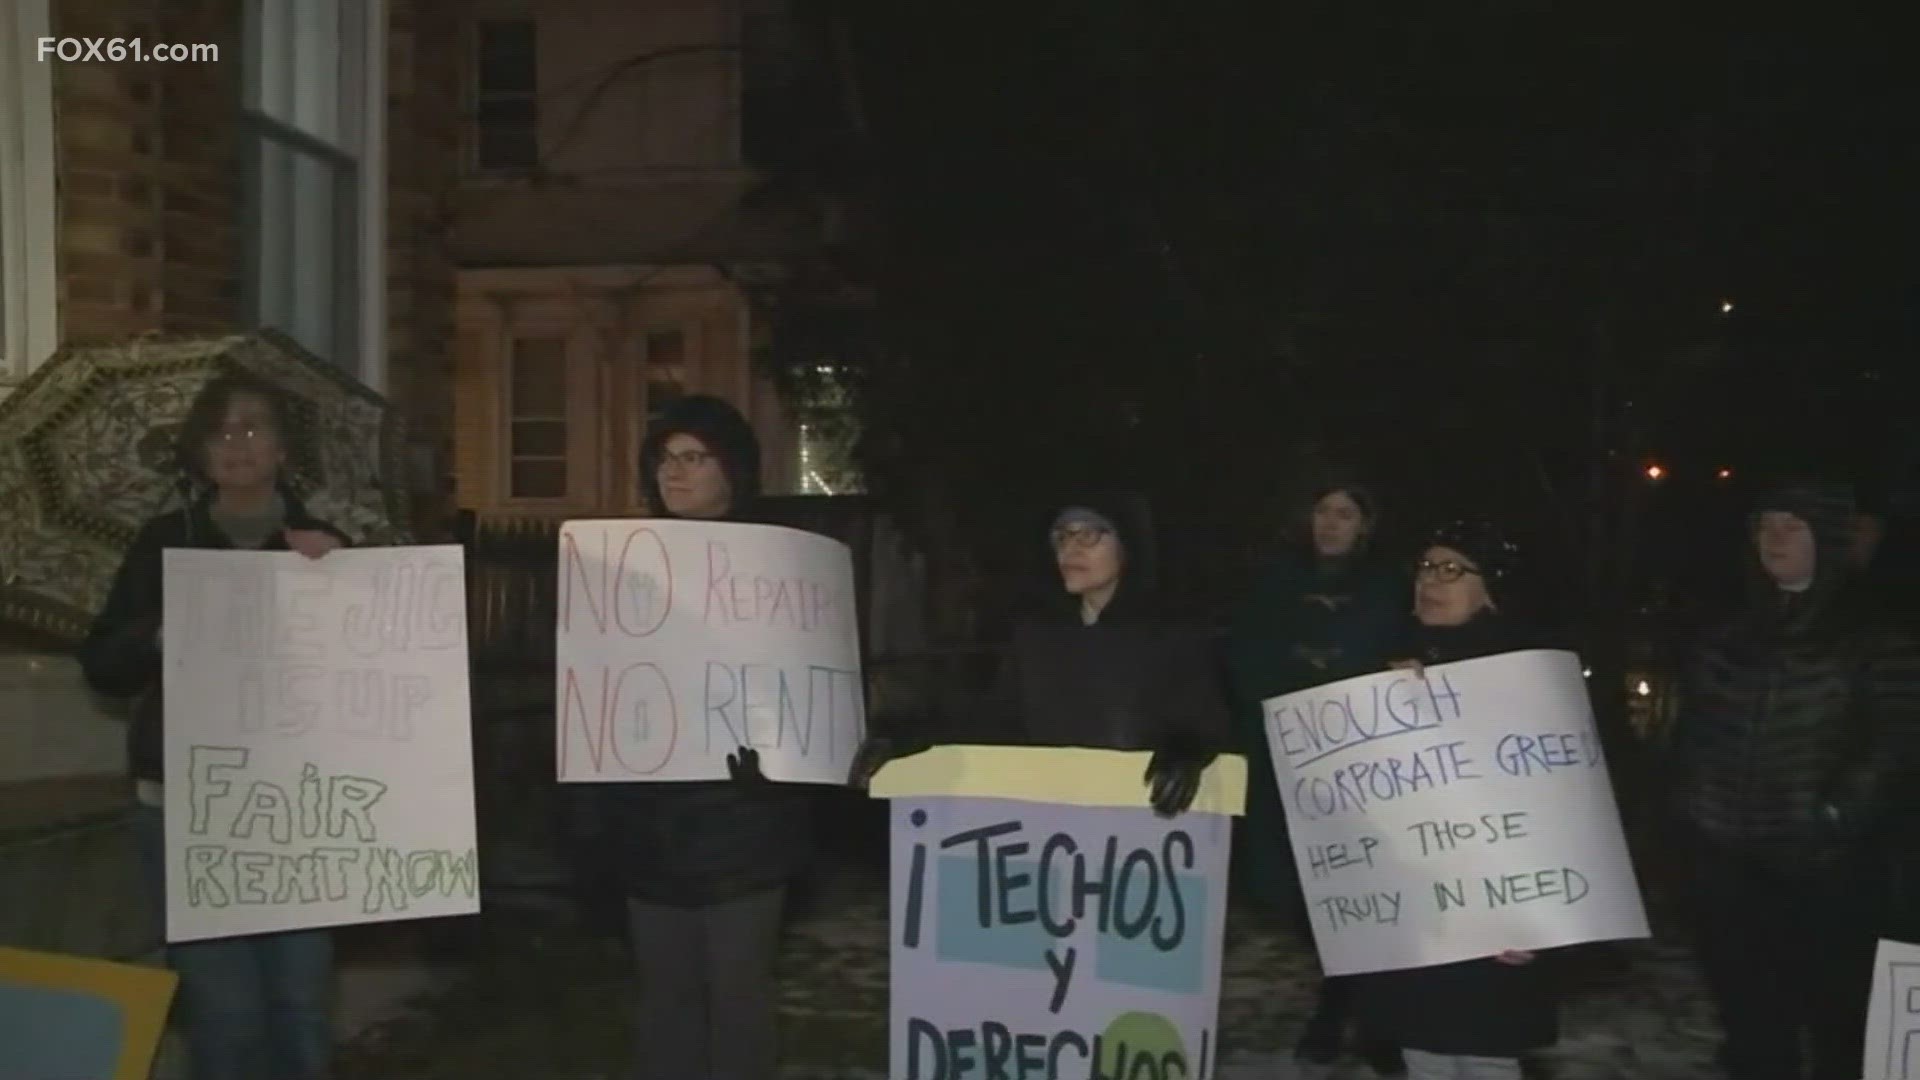 The Hartford tenants have been living in deplorable conditions for months and are rallying for change.